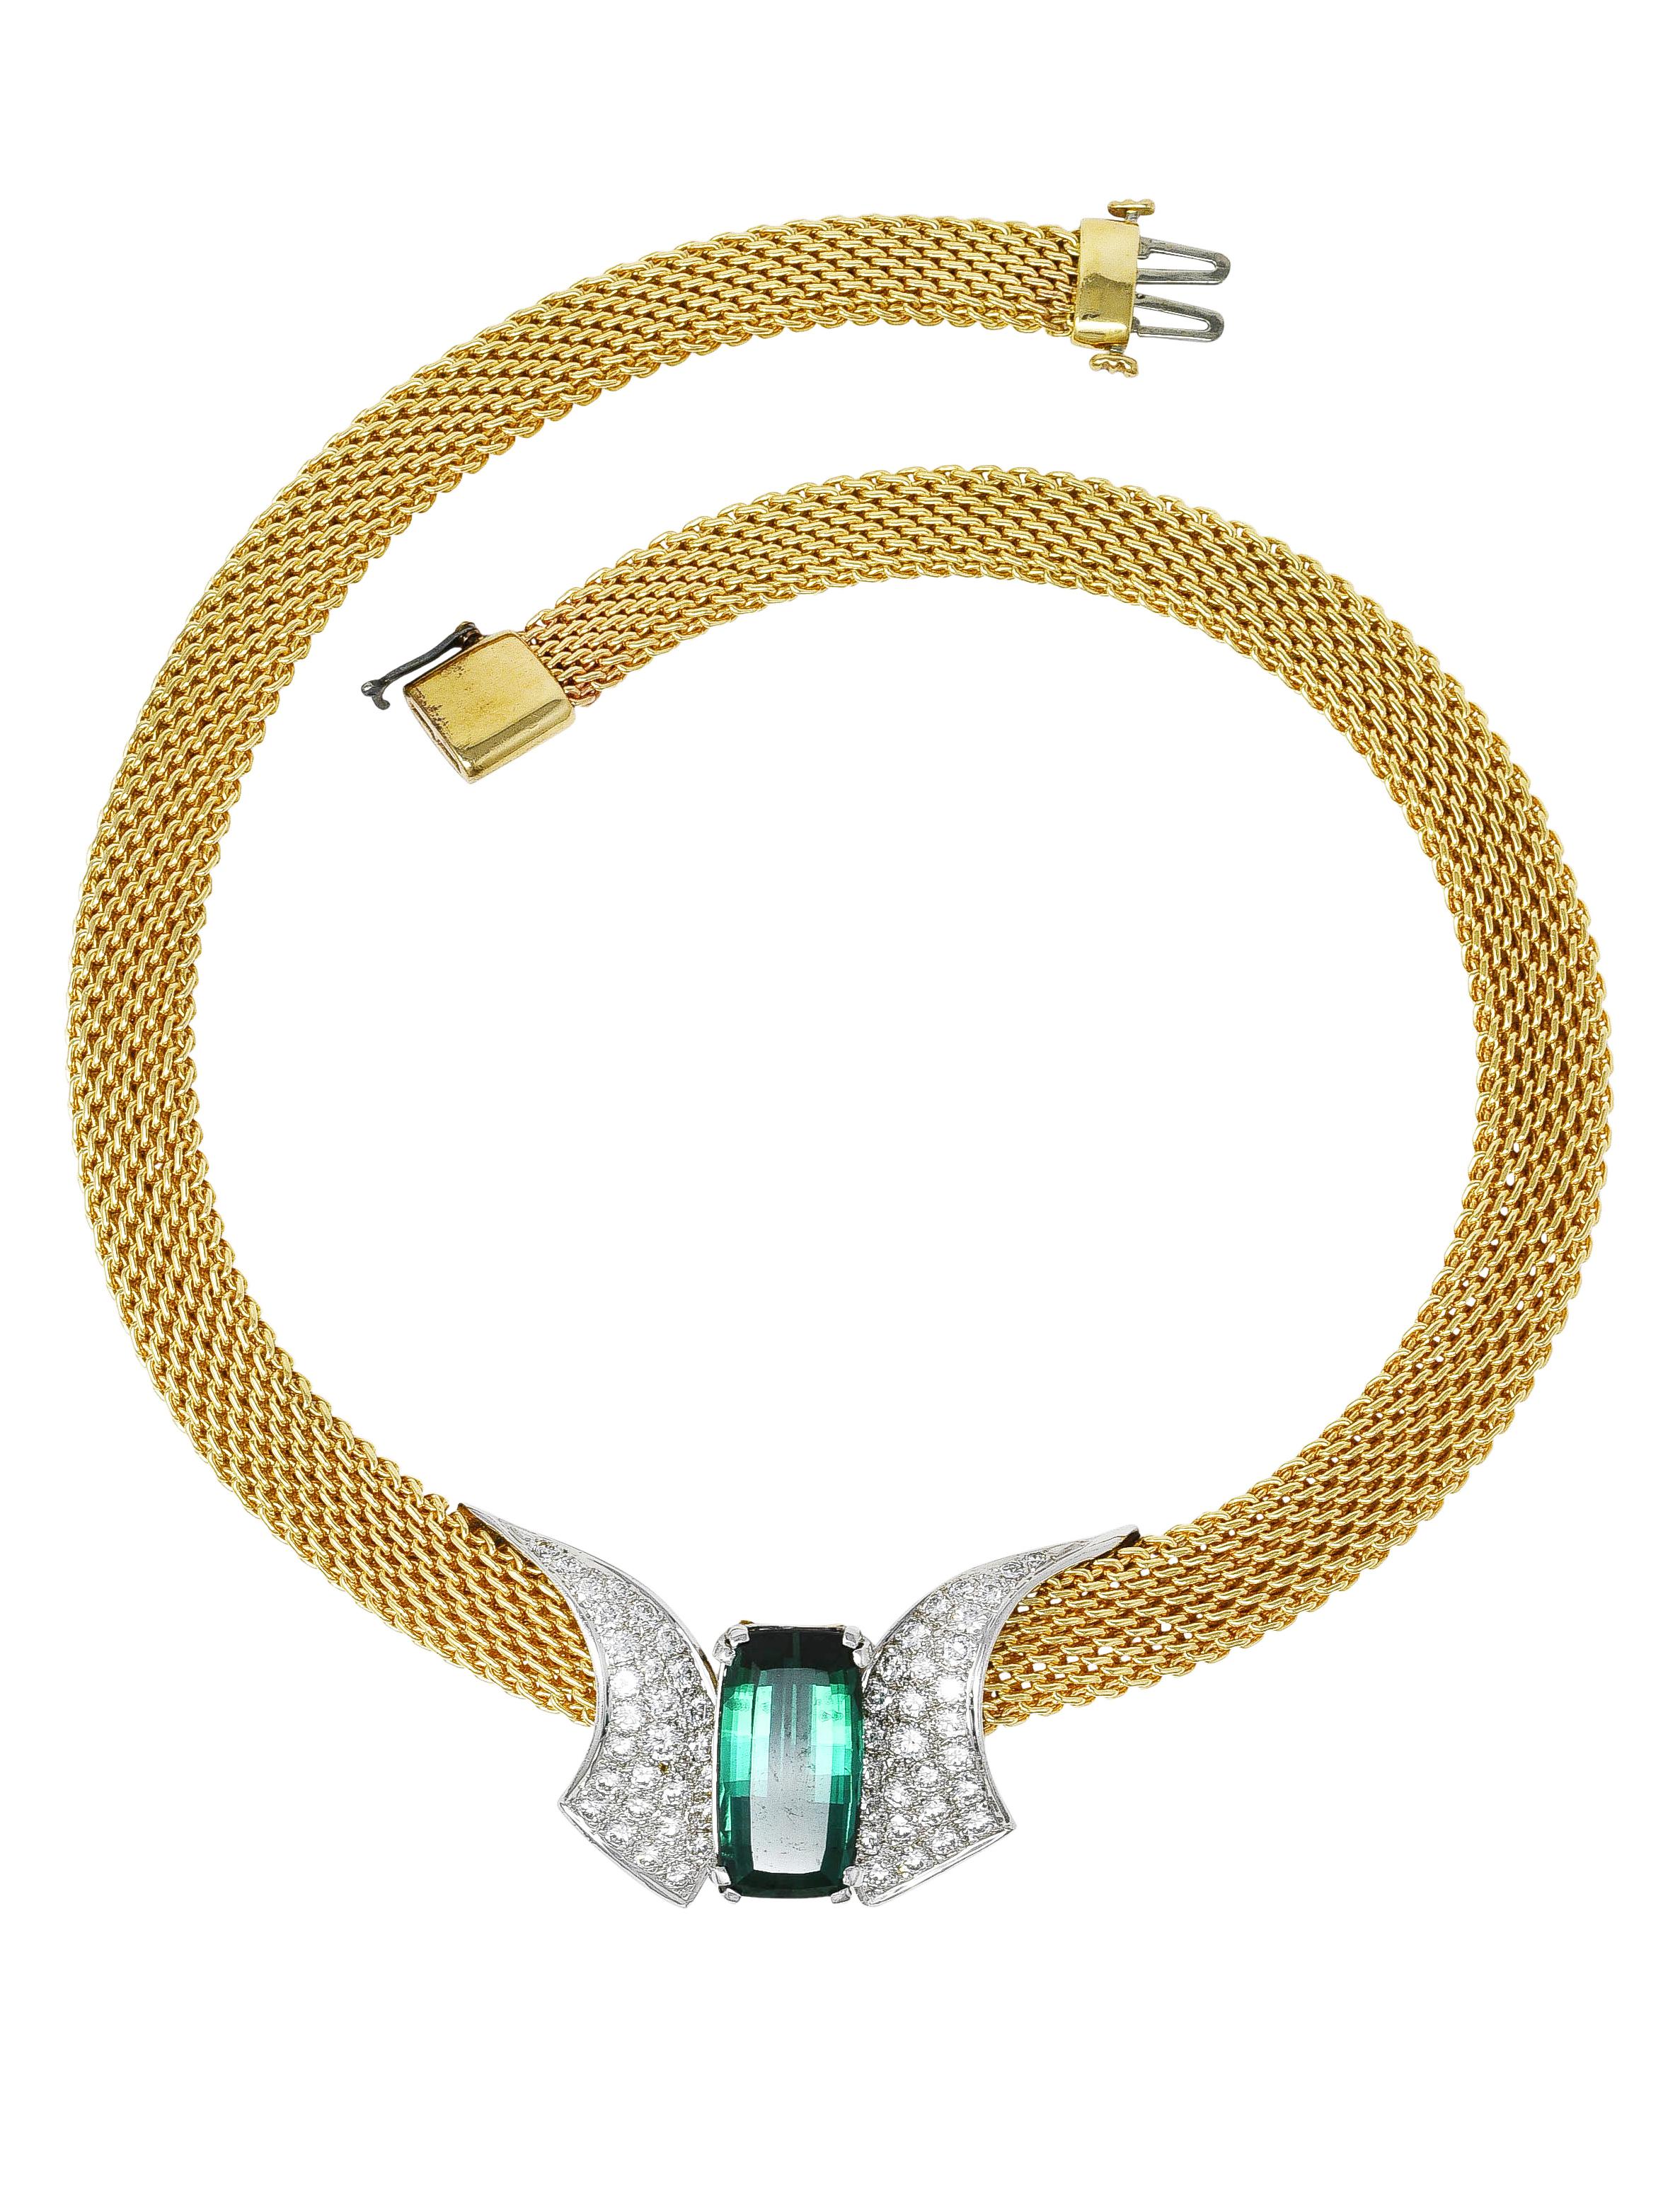 Designed as a woven mesh yellow gold chain graduating in size and centering a curling white gold station. Featuring an elongated mixed cushion cut tourmaline weighing approximately 7.97 carats total. Transparent bluish-green to green in color with